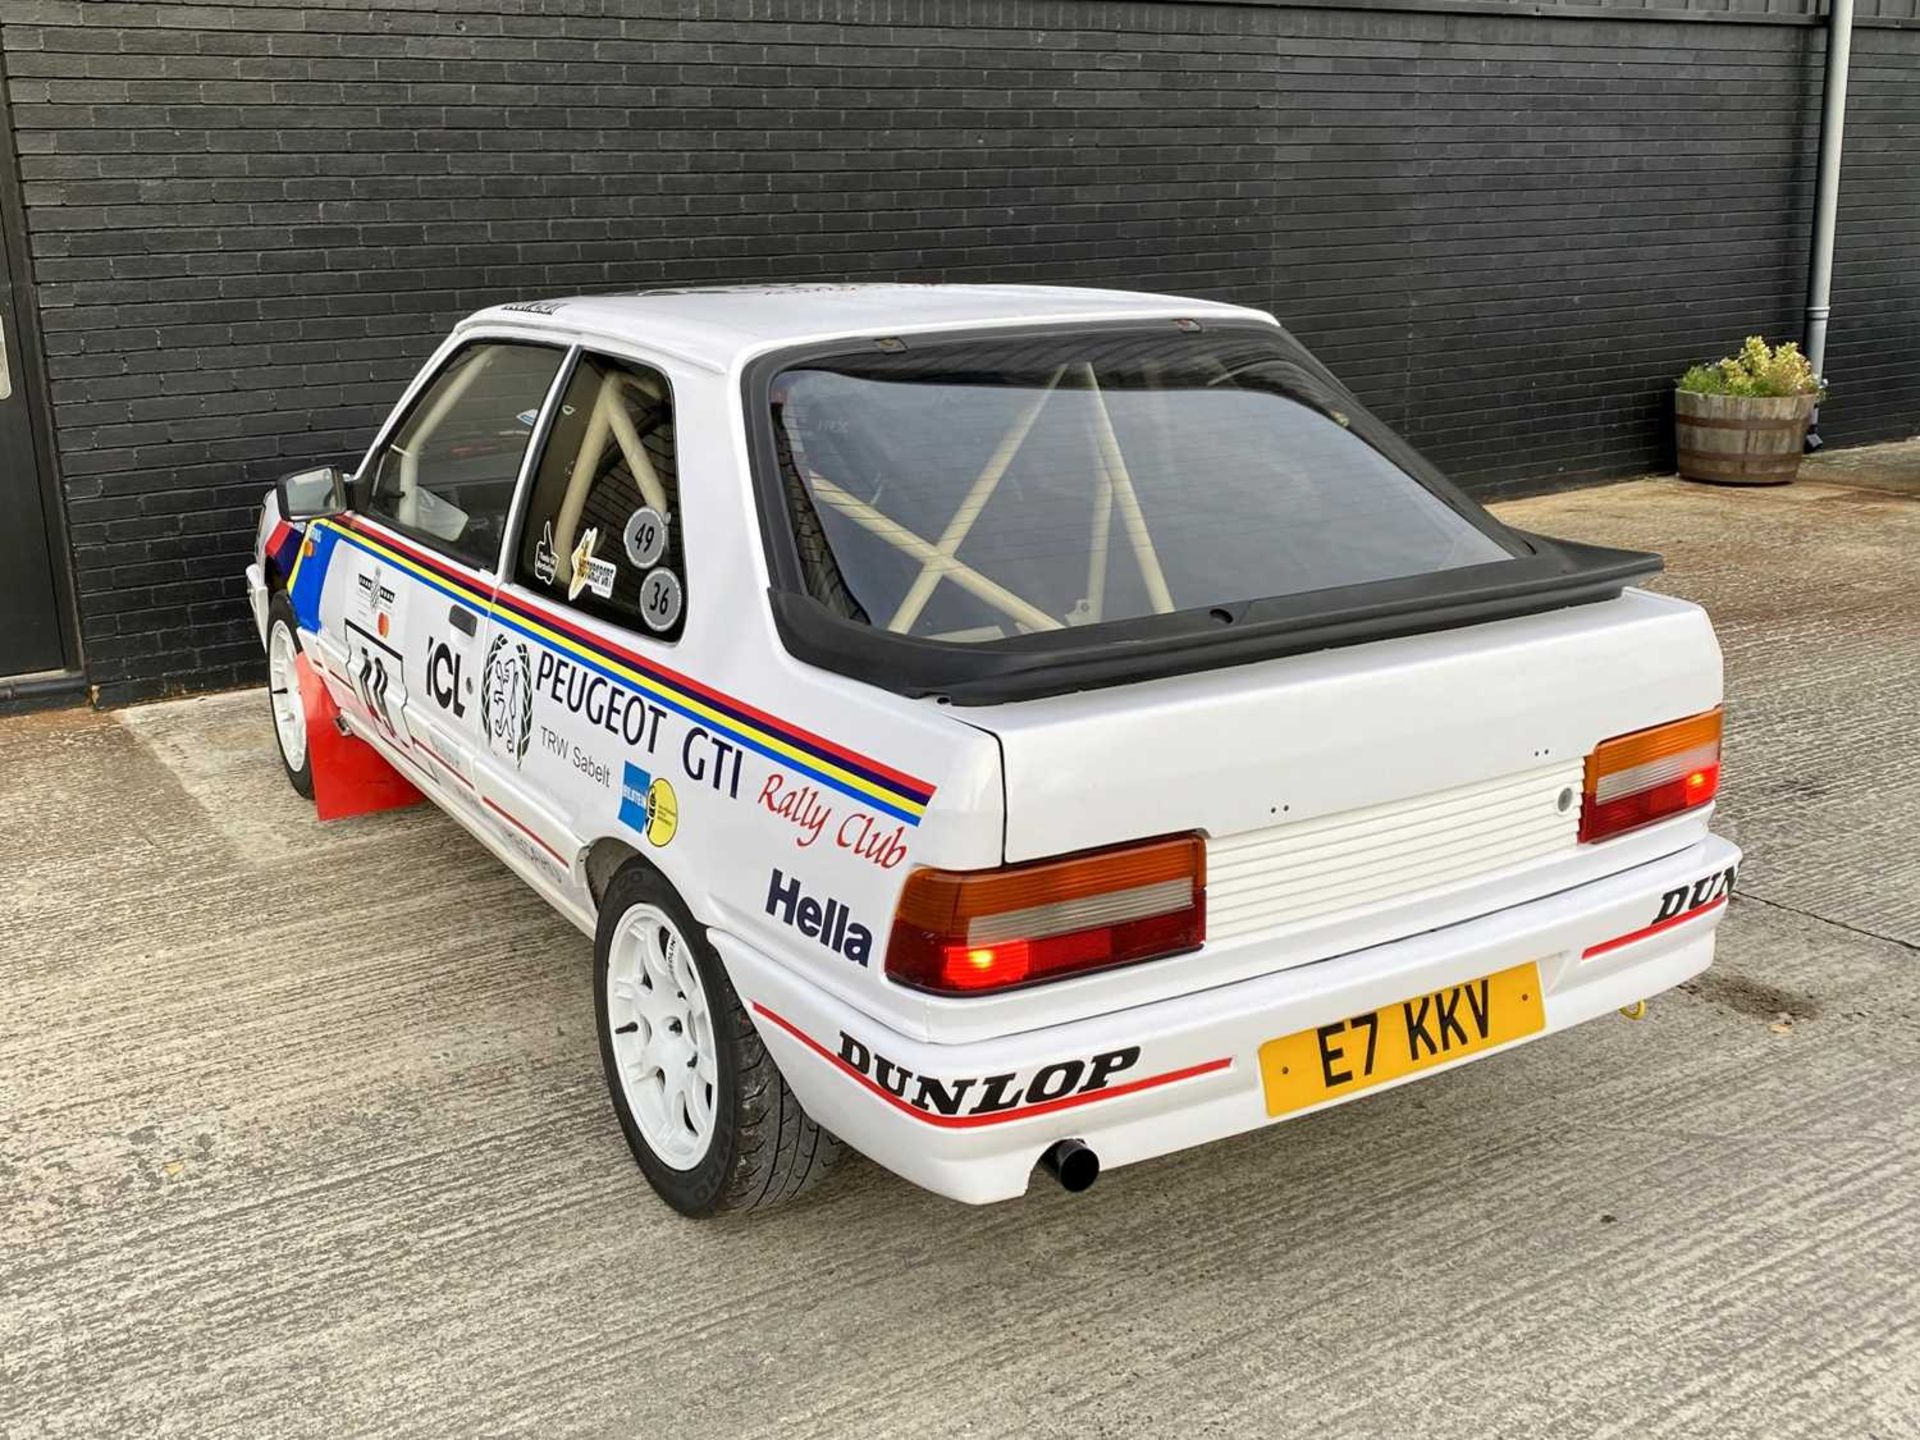 1987 Peugeot 309 GTi Group N Rally Car FIA paperwork and a previous entrant at the Goodwood Festival - Image 13 of 50